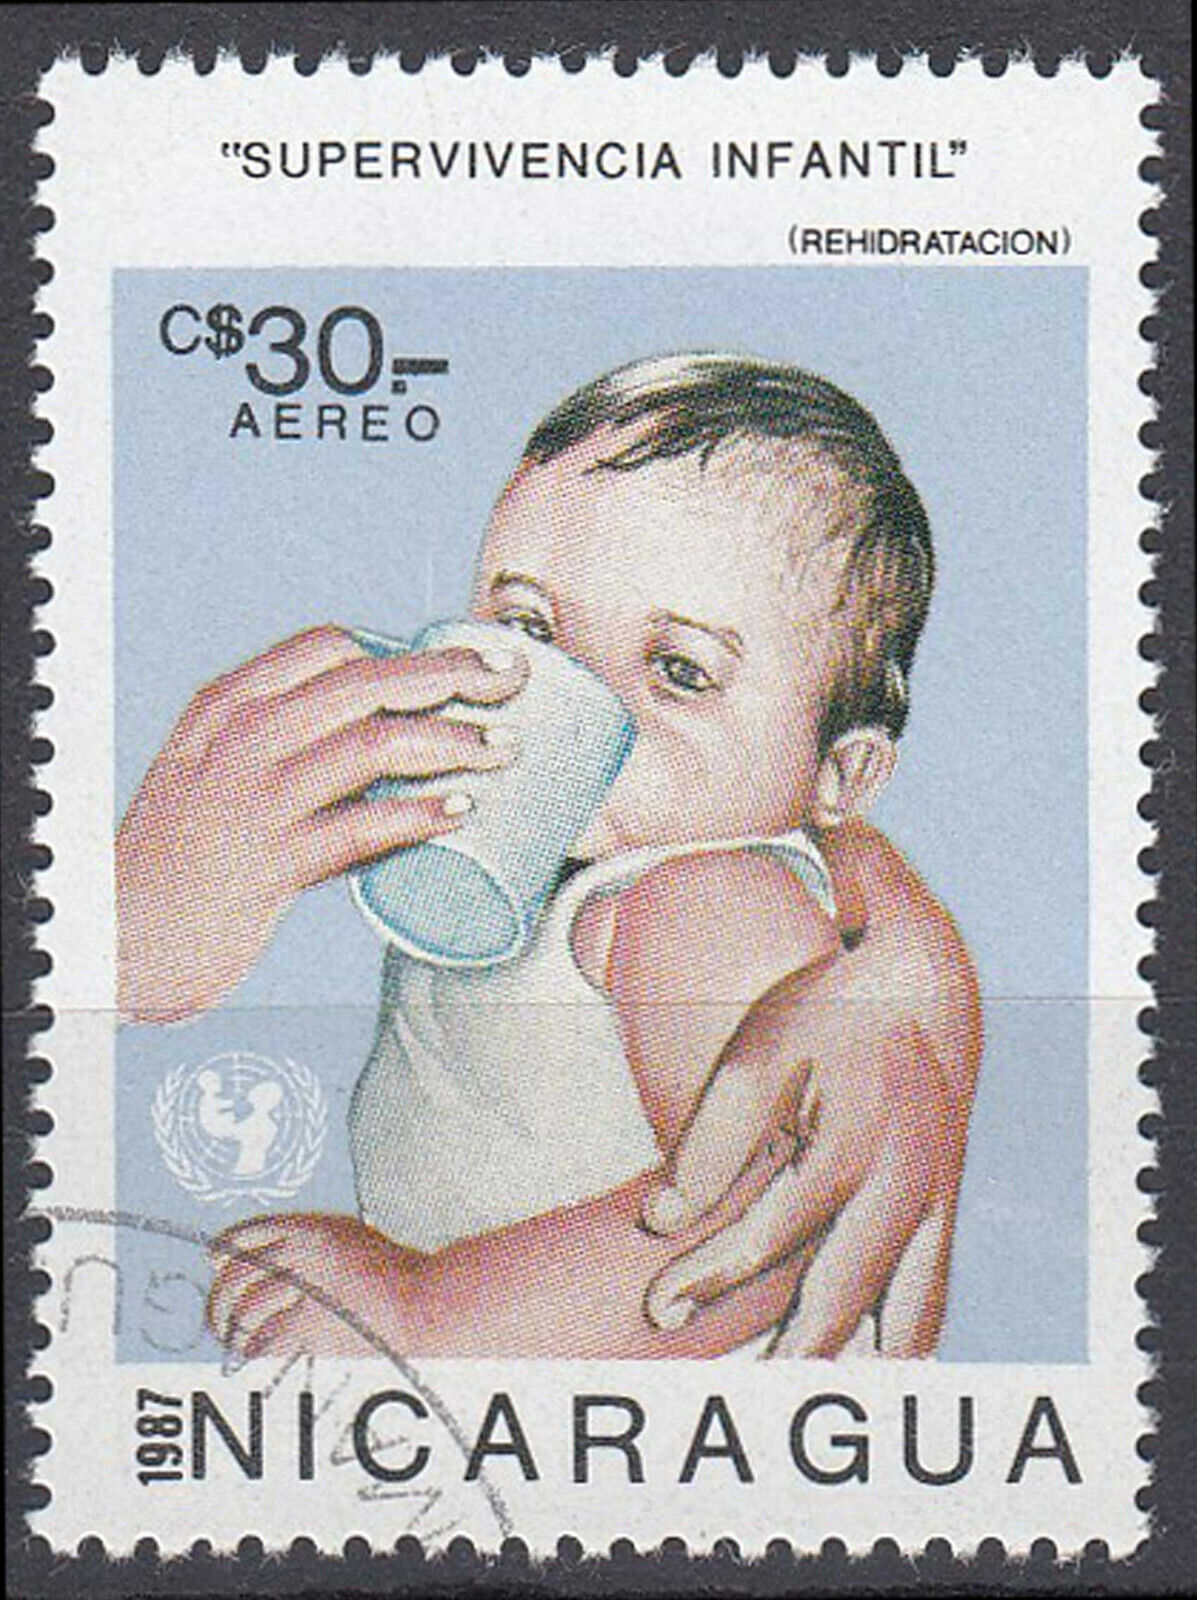 Nicaragua Stamp Stamped Fresno Mall UNICEF Max 84% OFF Health 152 Wellbeing Baby